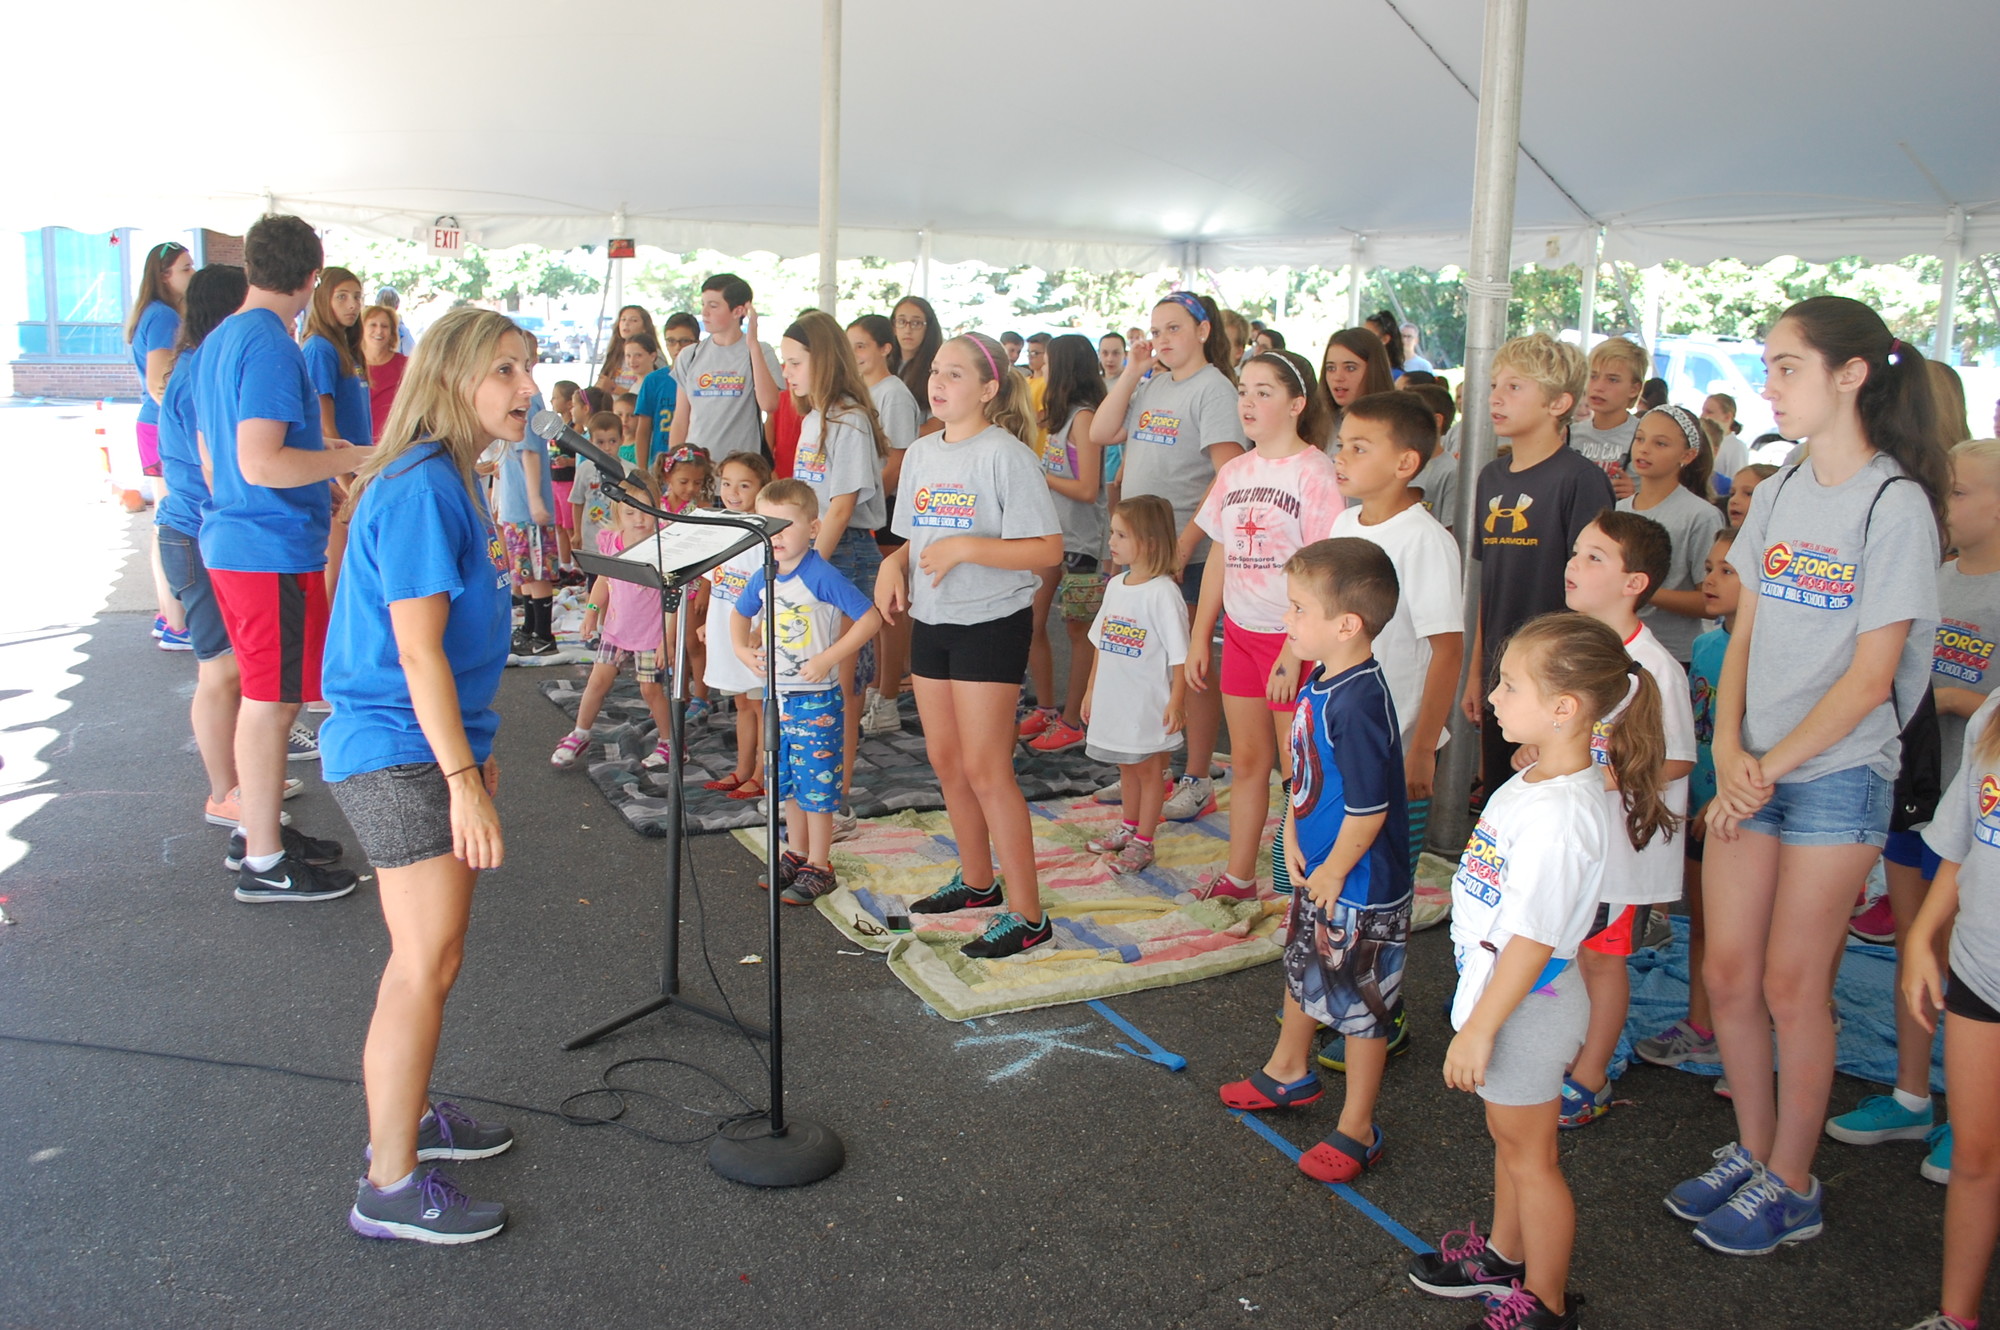 Each day’s program began with songs under the tent, led by Music Director Lisa Fucarino, left.